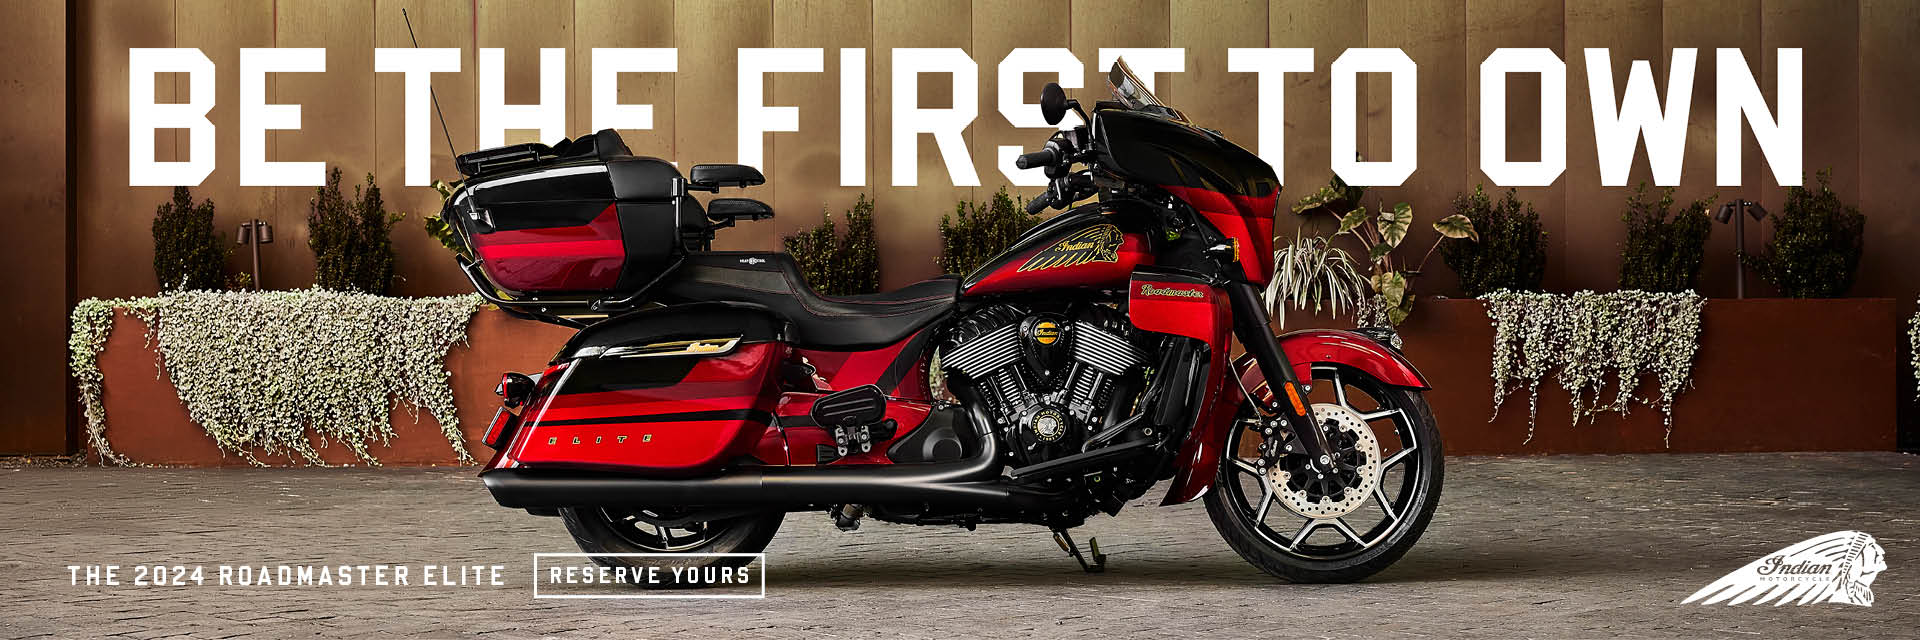 Go to indianmotorcycle.com